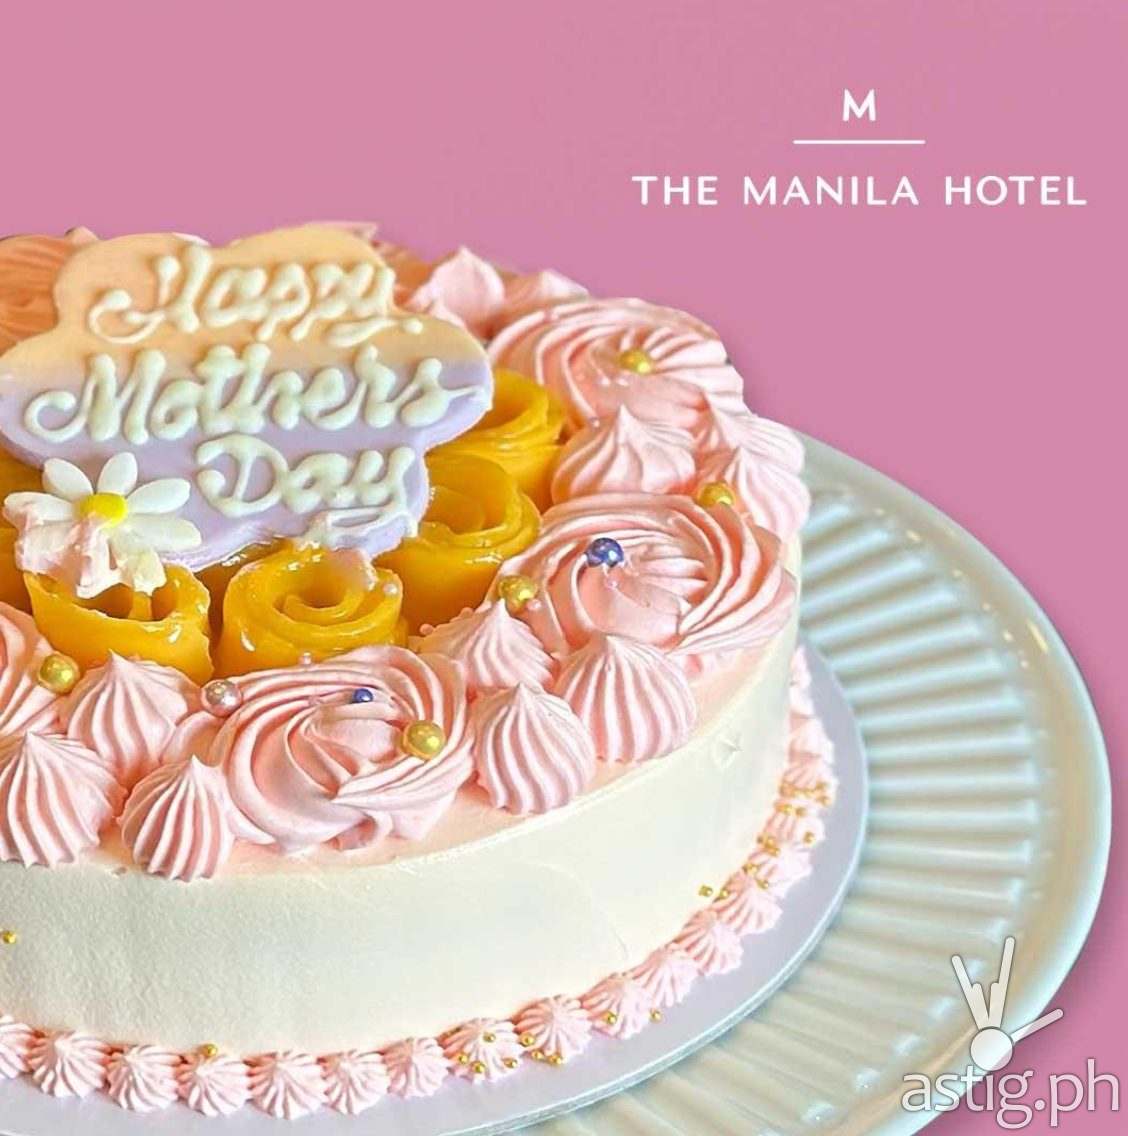 Celebrate Mother’s Day at The Manila Hotel